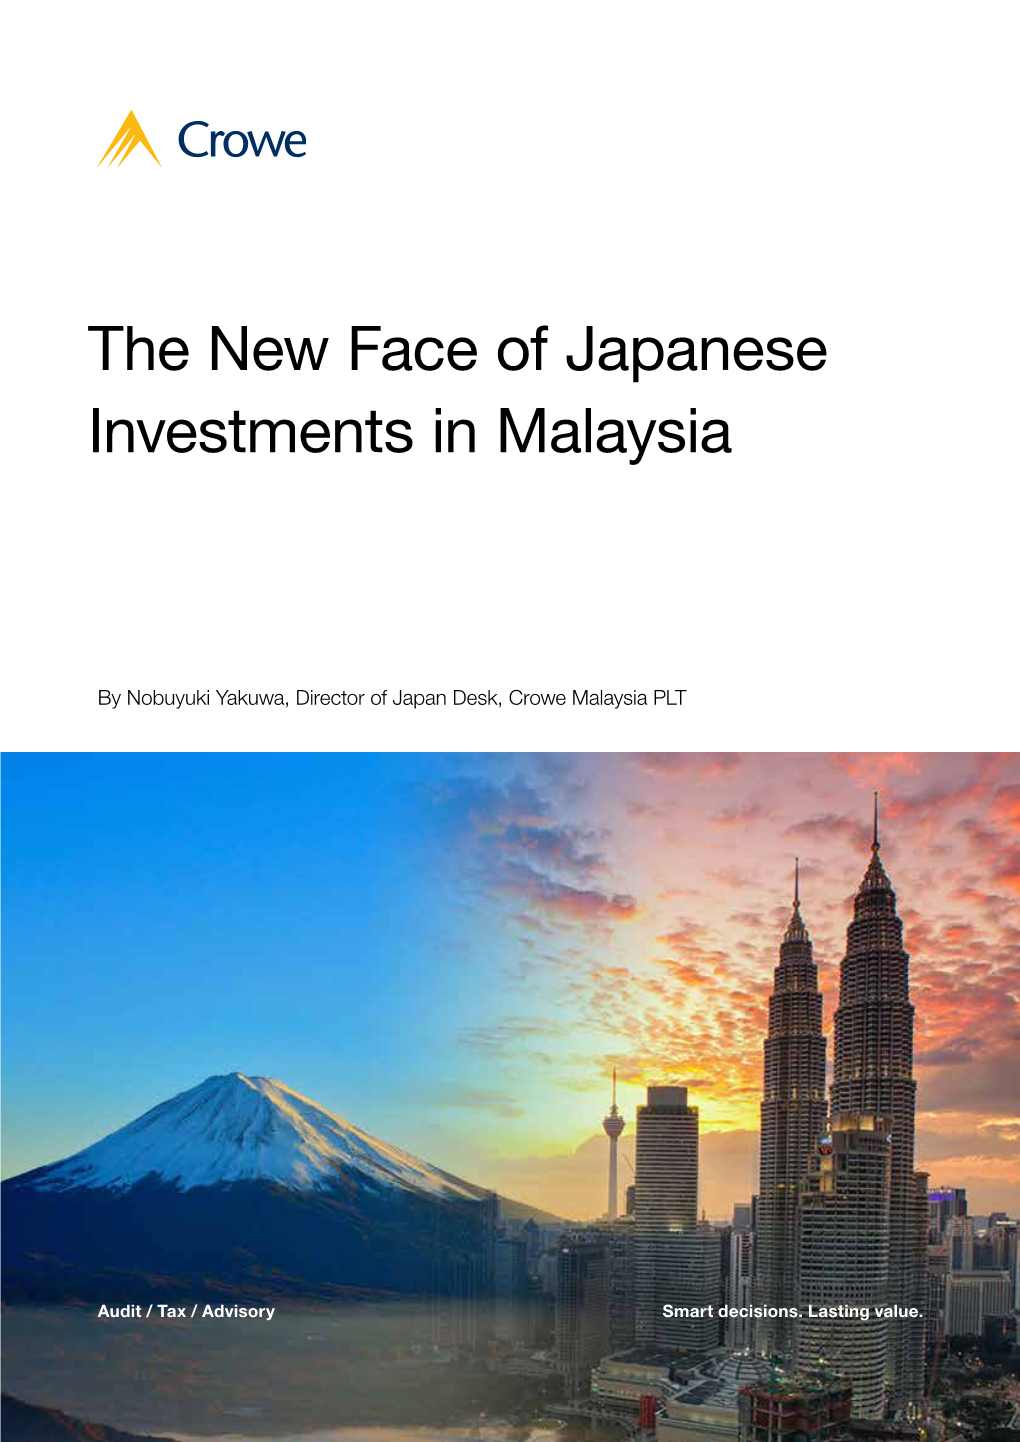 The New Face of Japanese Investments in Malaysia